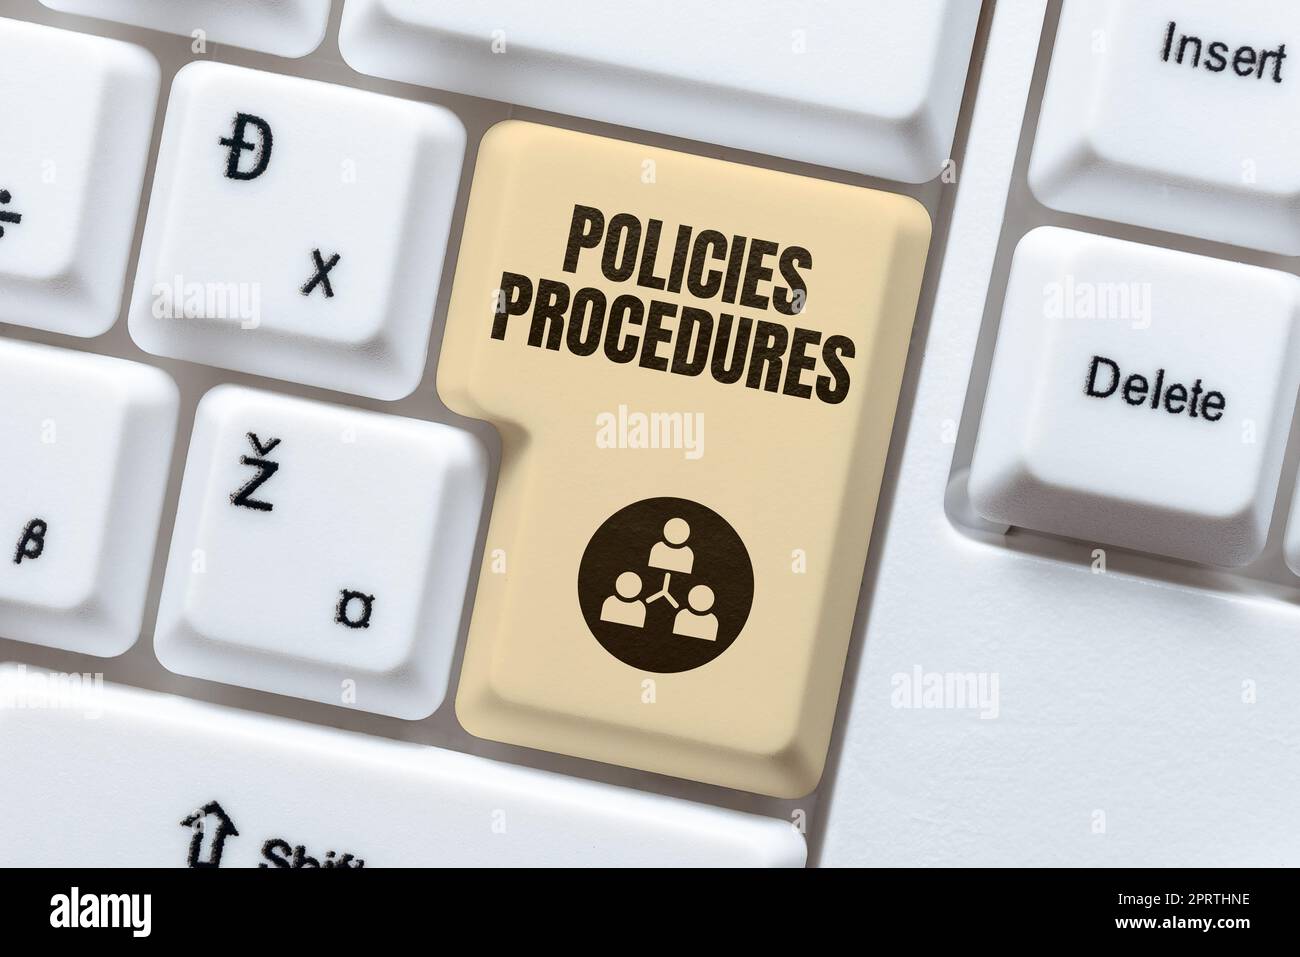 Writing displaying text Policies Procedures. Concept meaning Influence Major Decisions and Actions Rules Guidelines Stock Photo